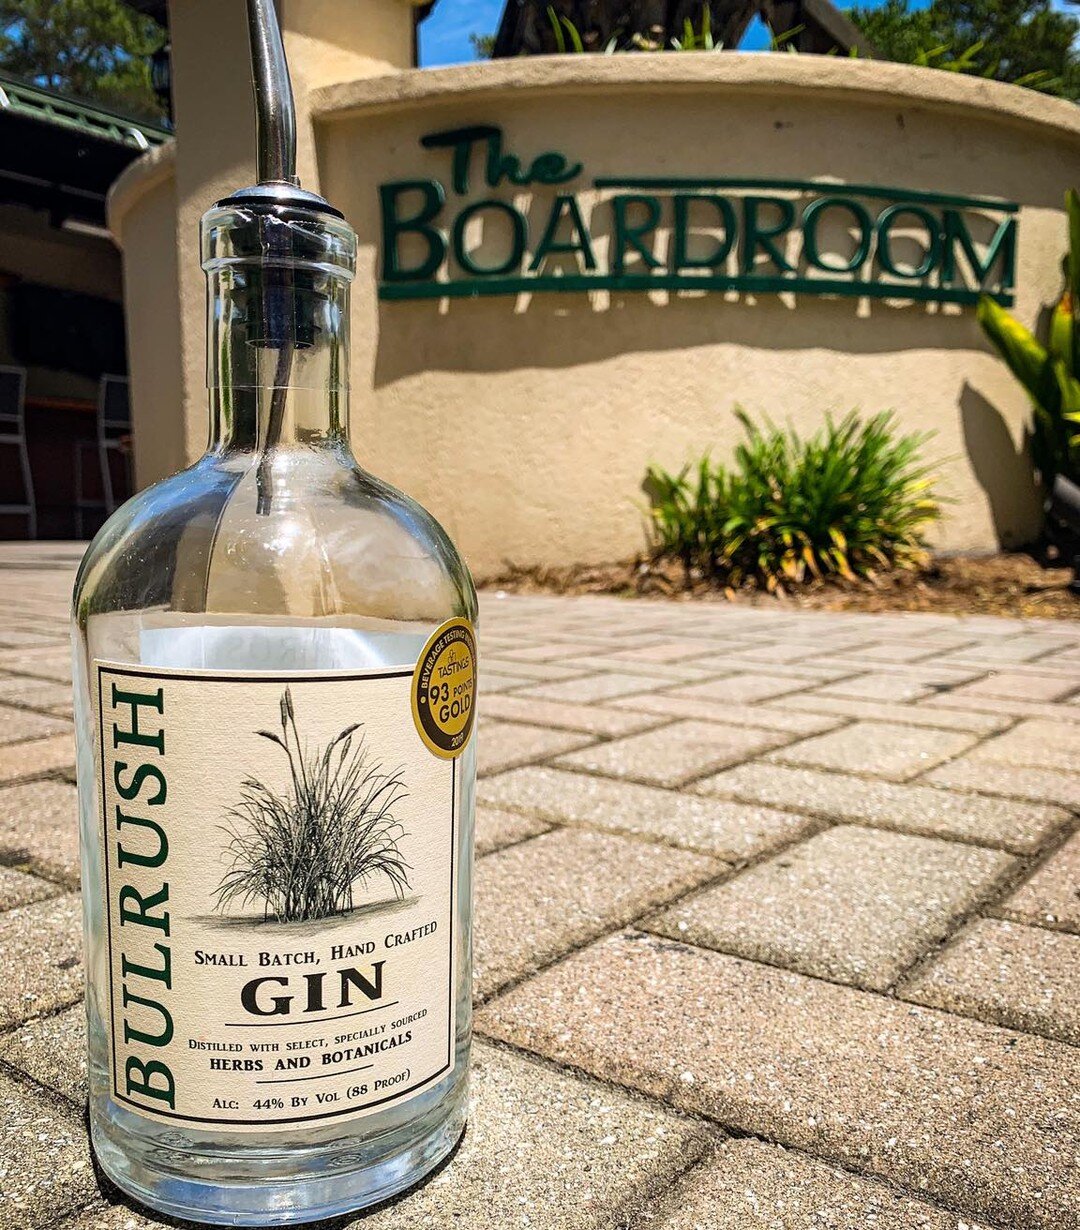 &bull;You&rsquo;re the Gin to my Tonic 🤪

#theboardroomhhi #boardroomhhi #CRAB #crabgroup #hiltonhead #happyhour #cocktails #ginandtonic #comeseeus